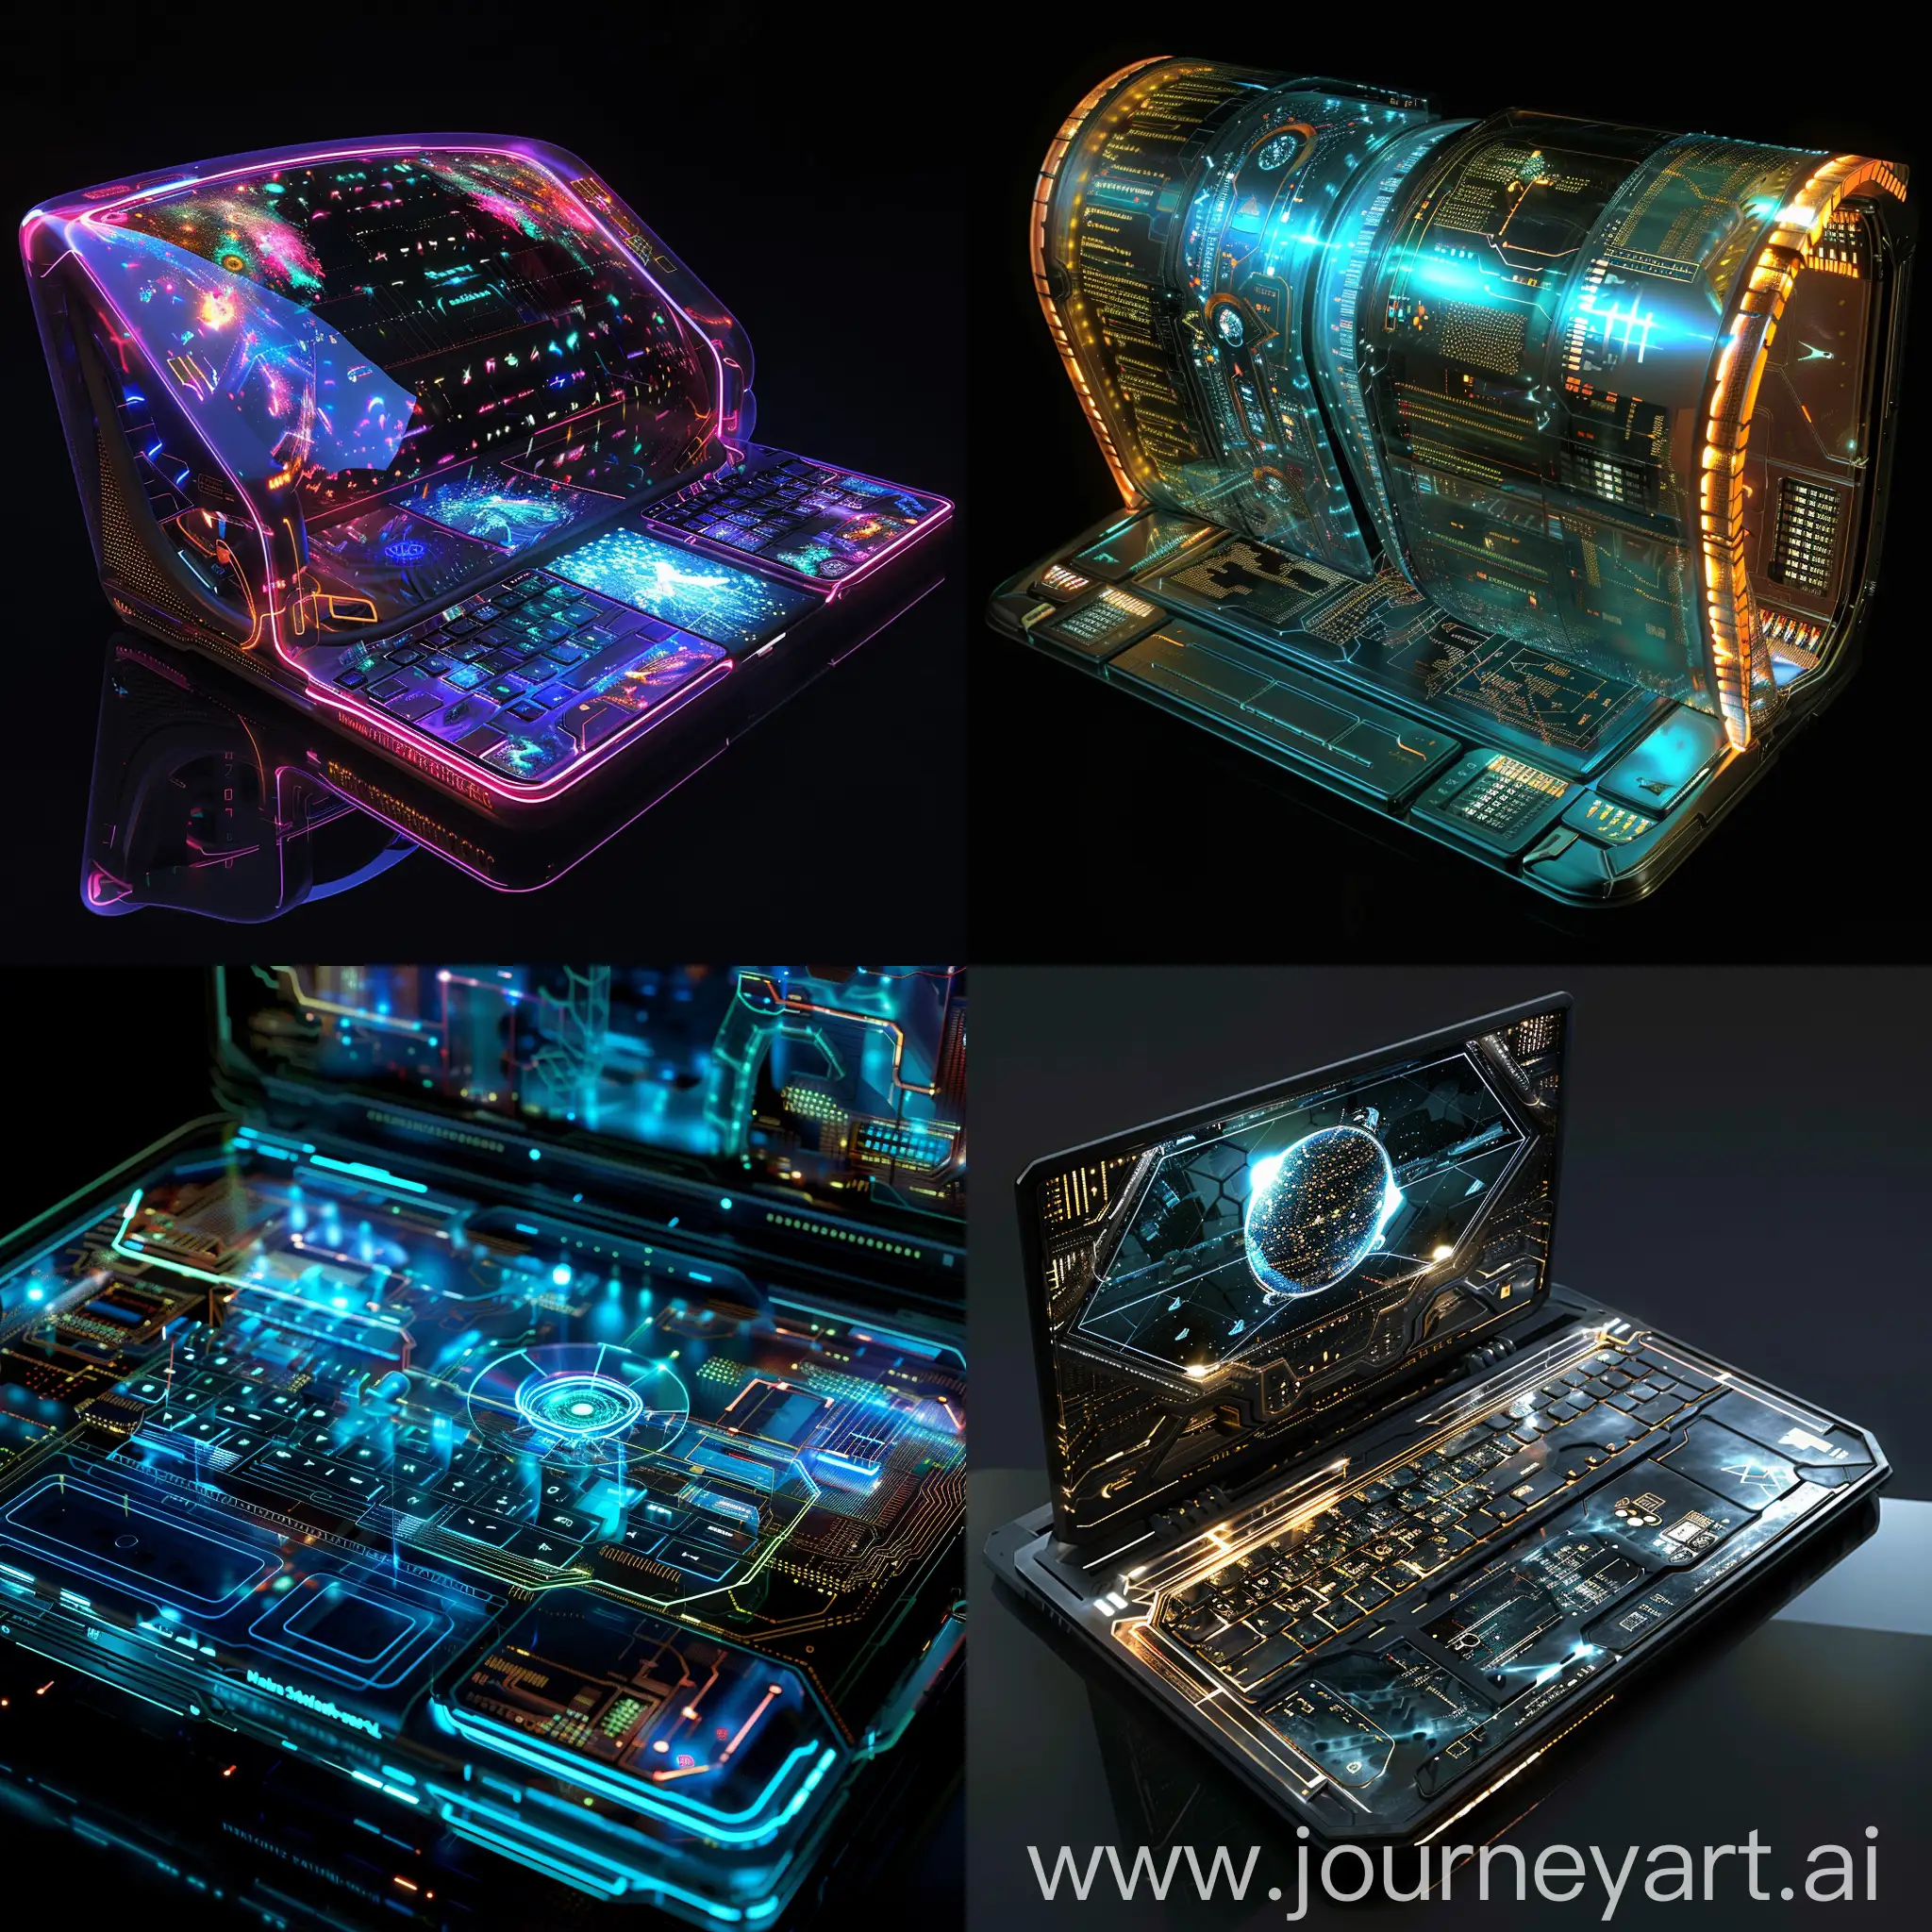 Speculative-SciFi-Laptop-with-Advanced-Technology-Features